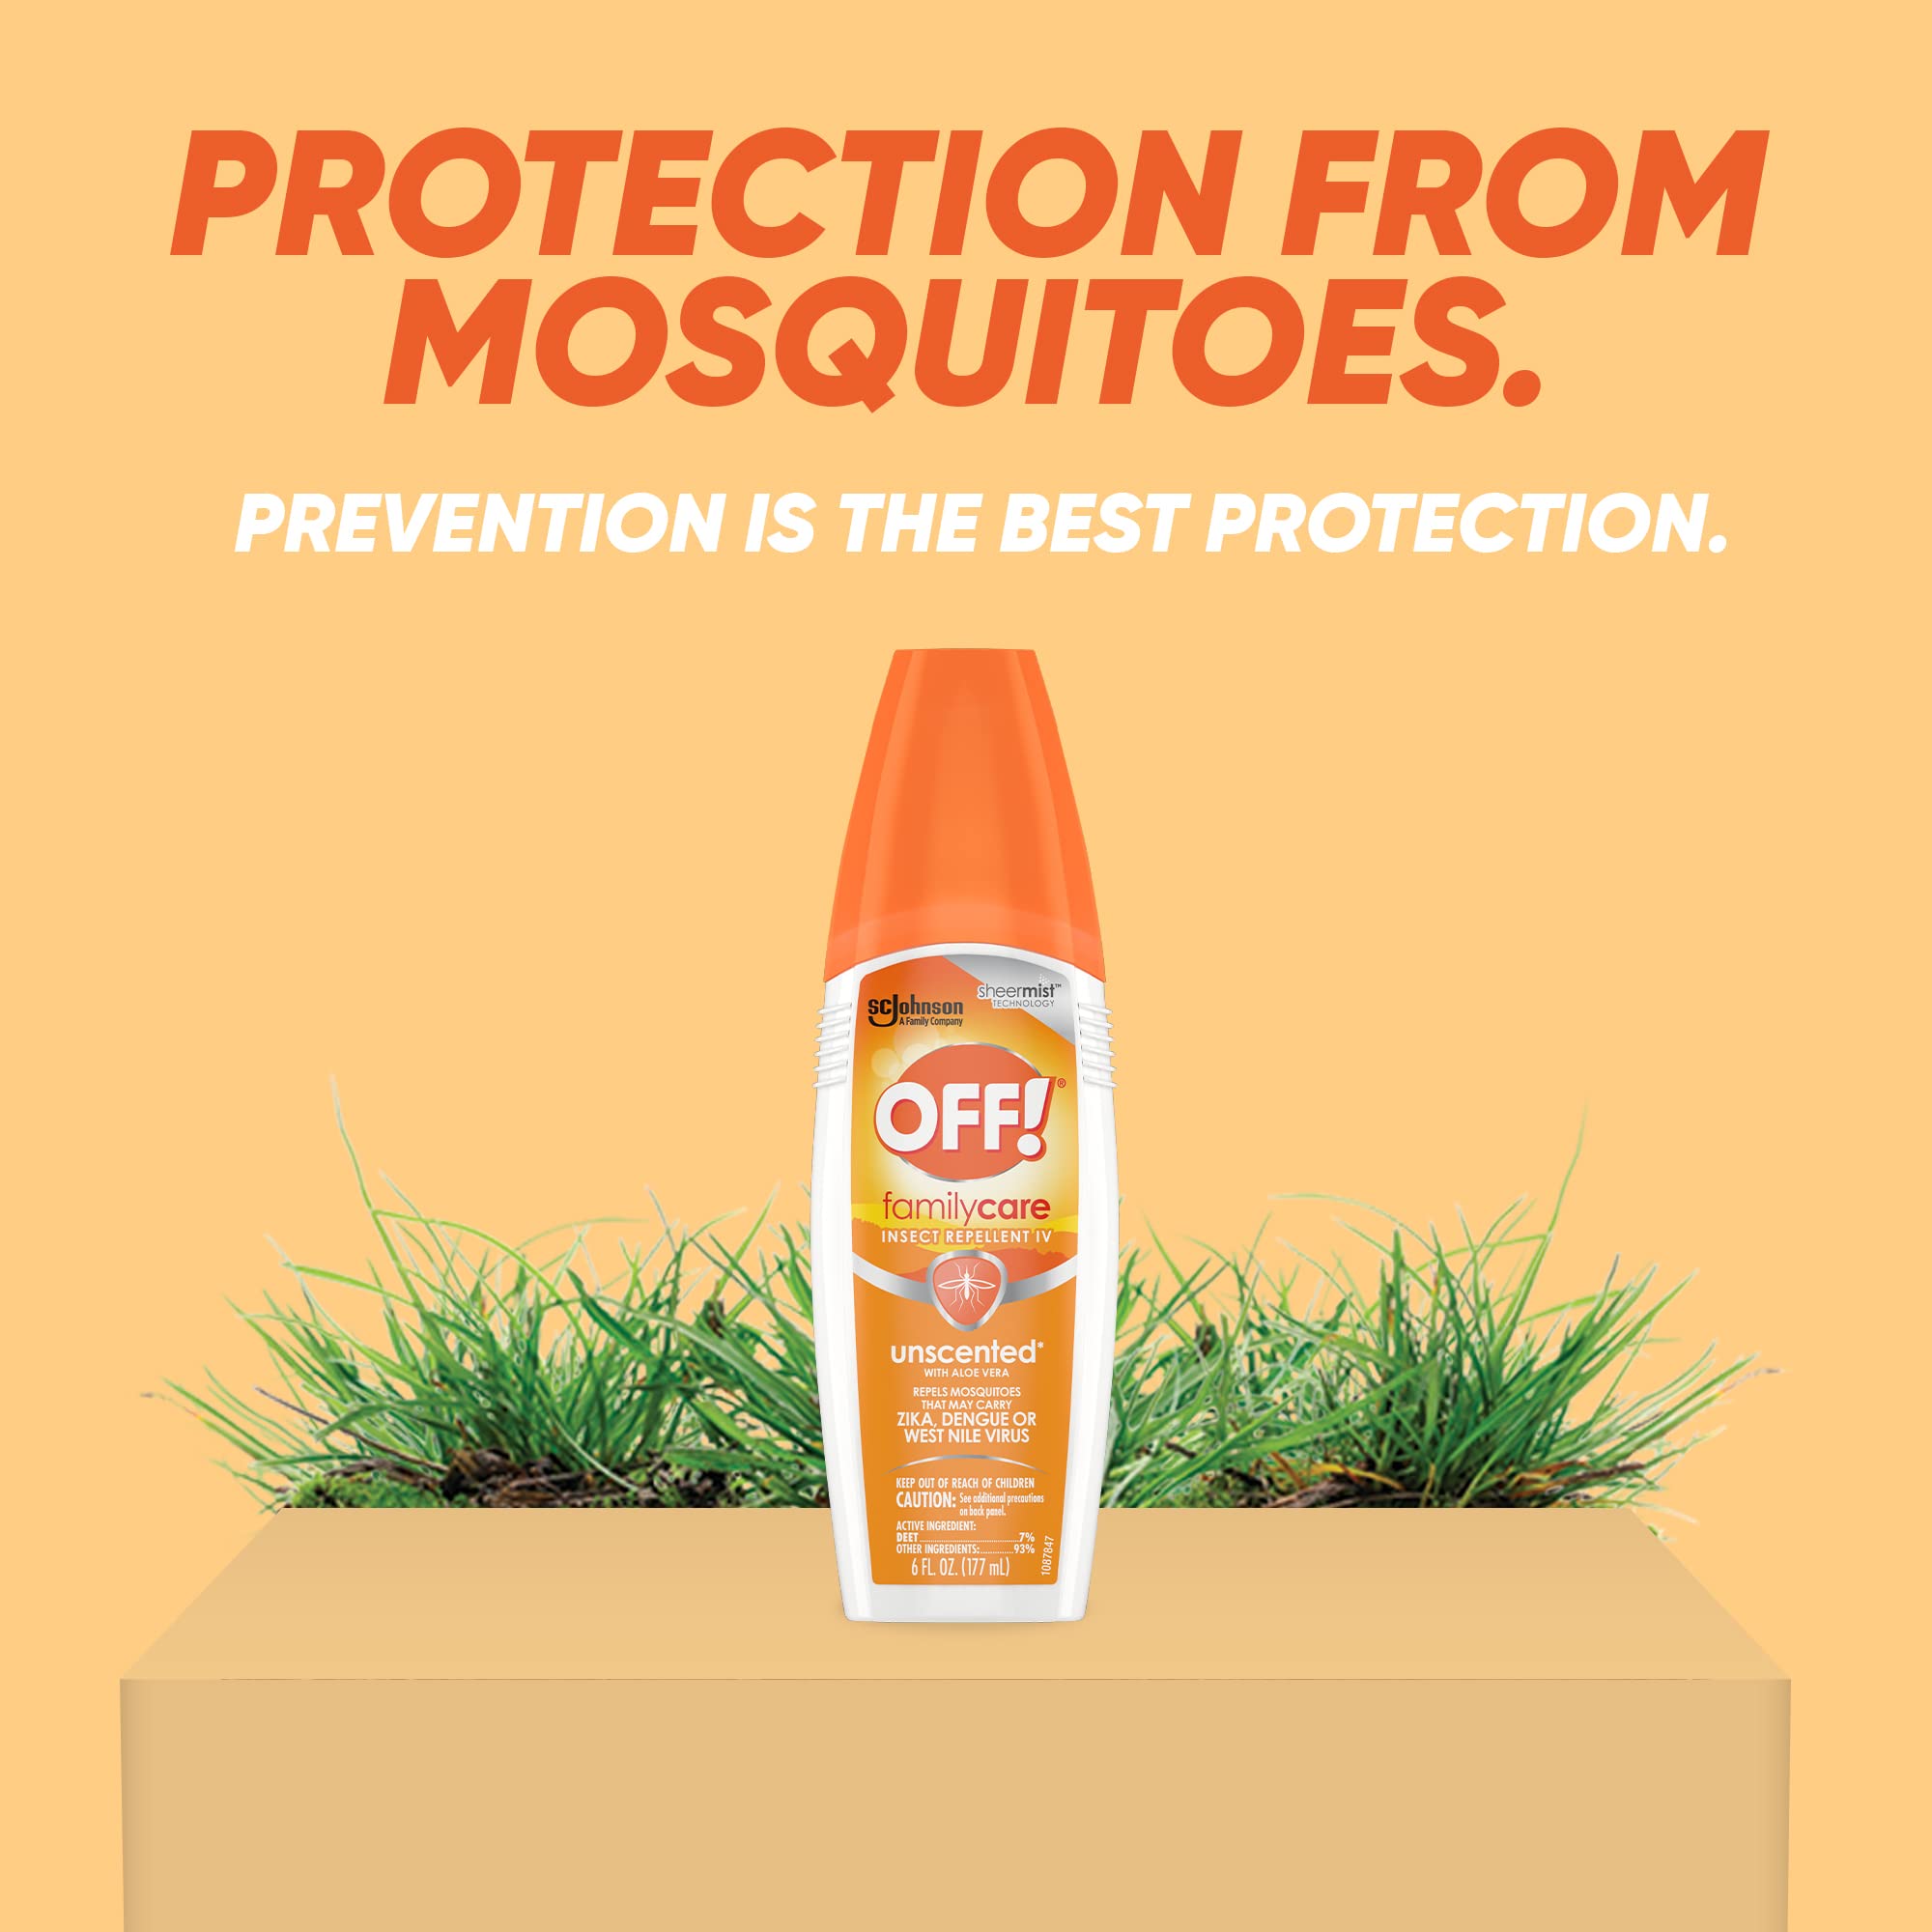 OFF! FamilyCare Insect & Mosquito Repellent Spritz, Unscented Bug spray with Aloe-Vera, 7% Deet, 6 oz (Pack of 2)